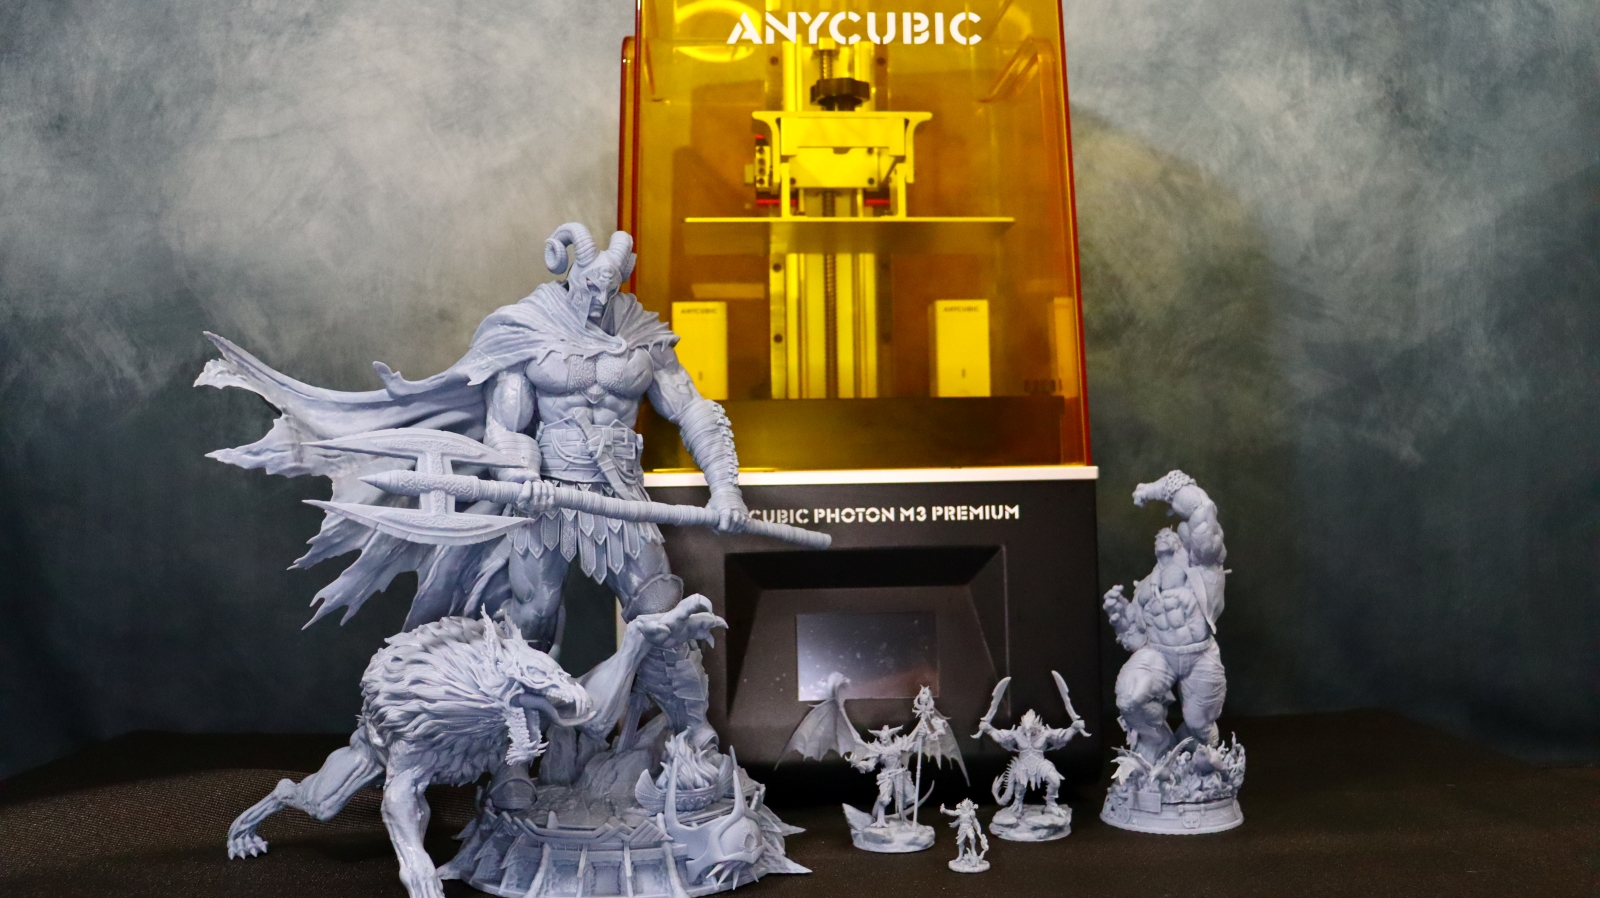 Anycubic Photon M3 Premium_ 3D Printer Full Scale with Test Prints